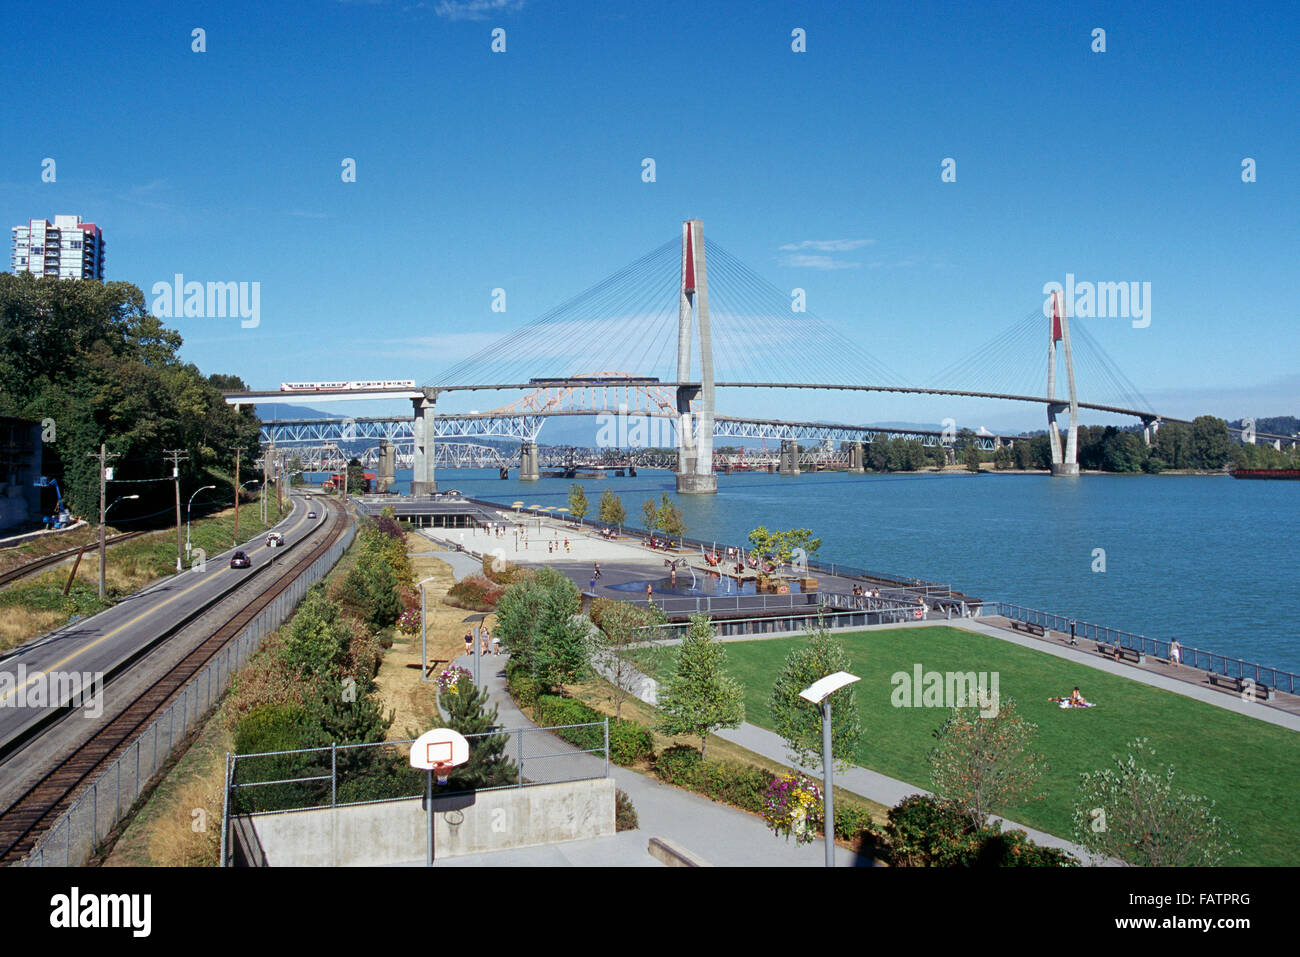 New Westminster, British Columbia, Canada - Westminster Pier Park, Skybridge, and Patullo Bridge over the Fraser River Stock Photo